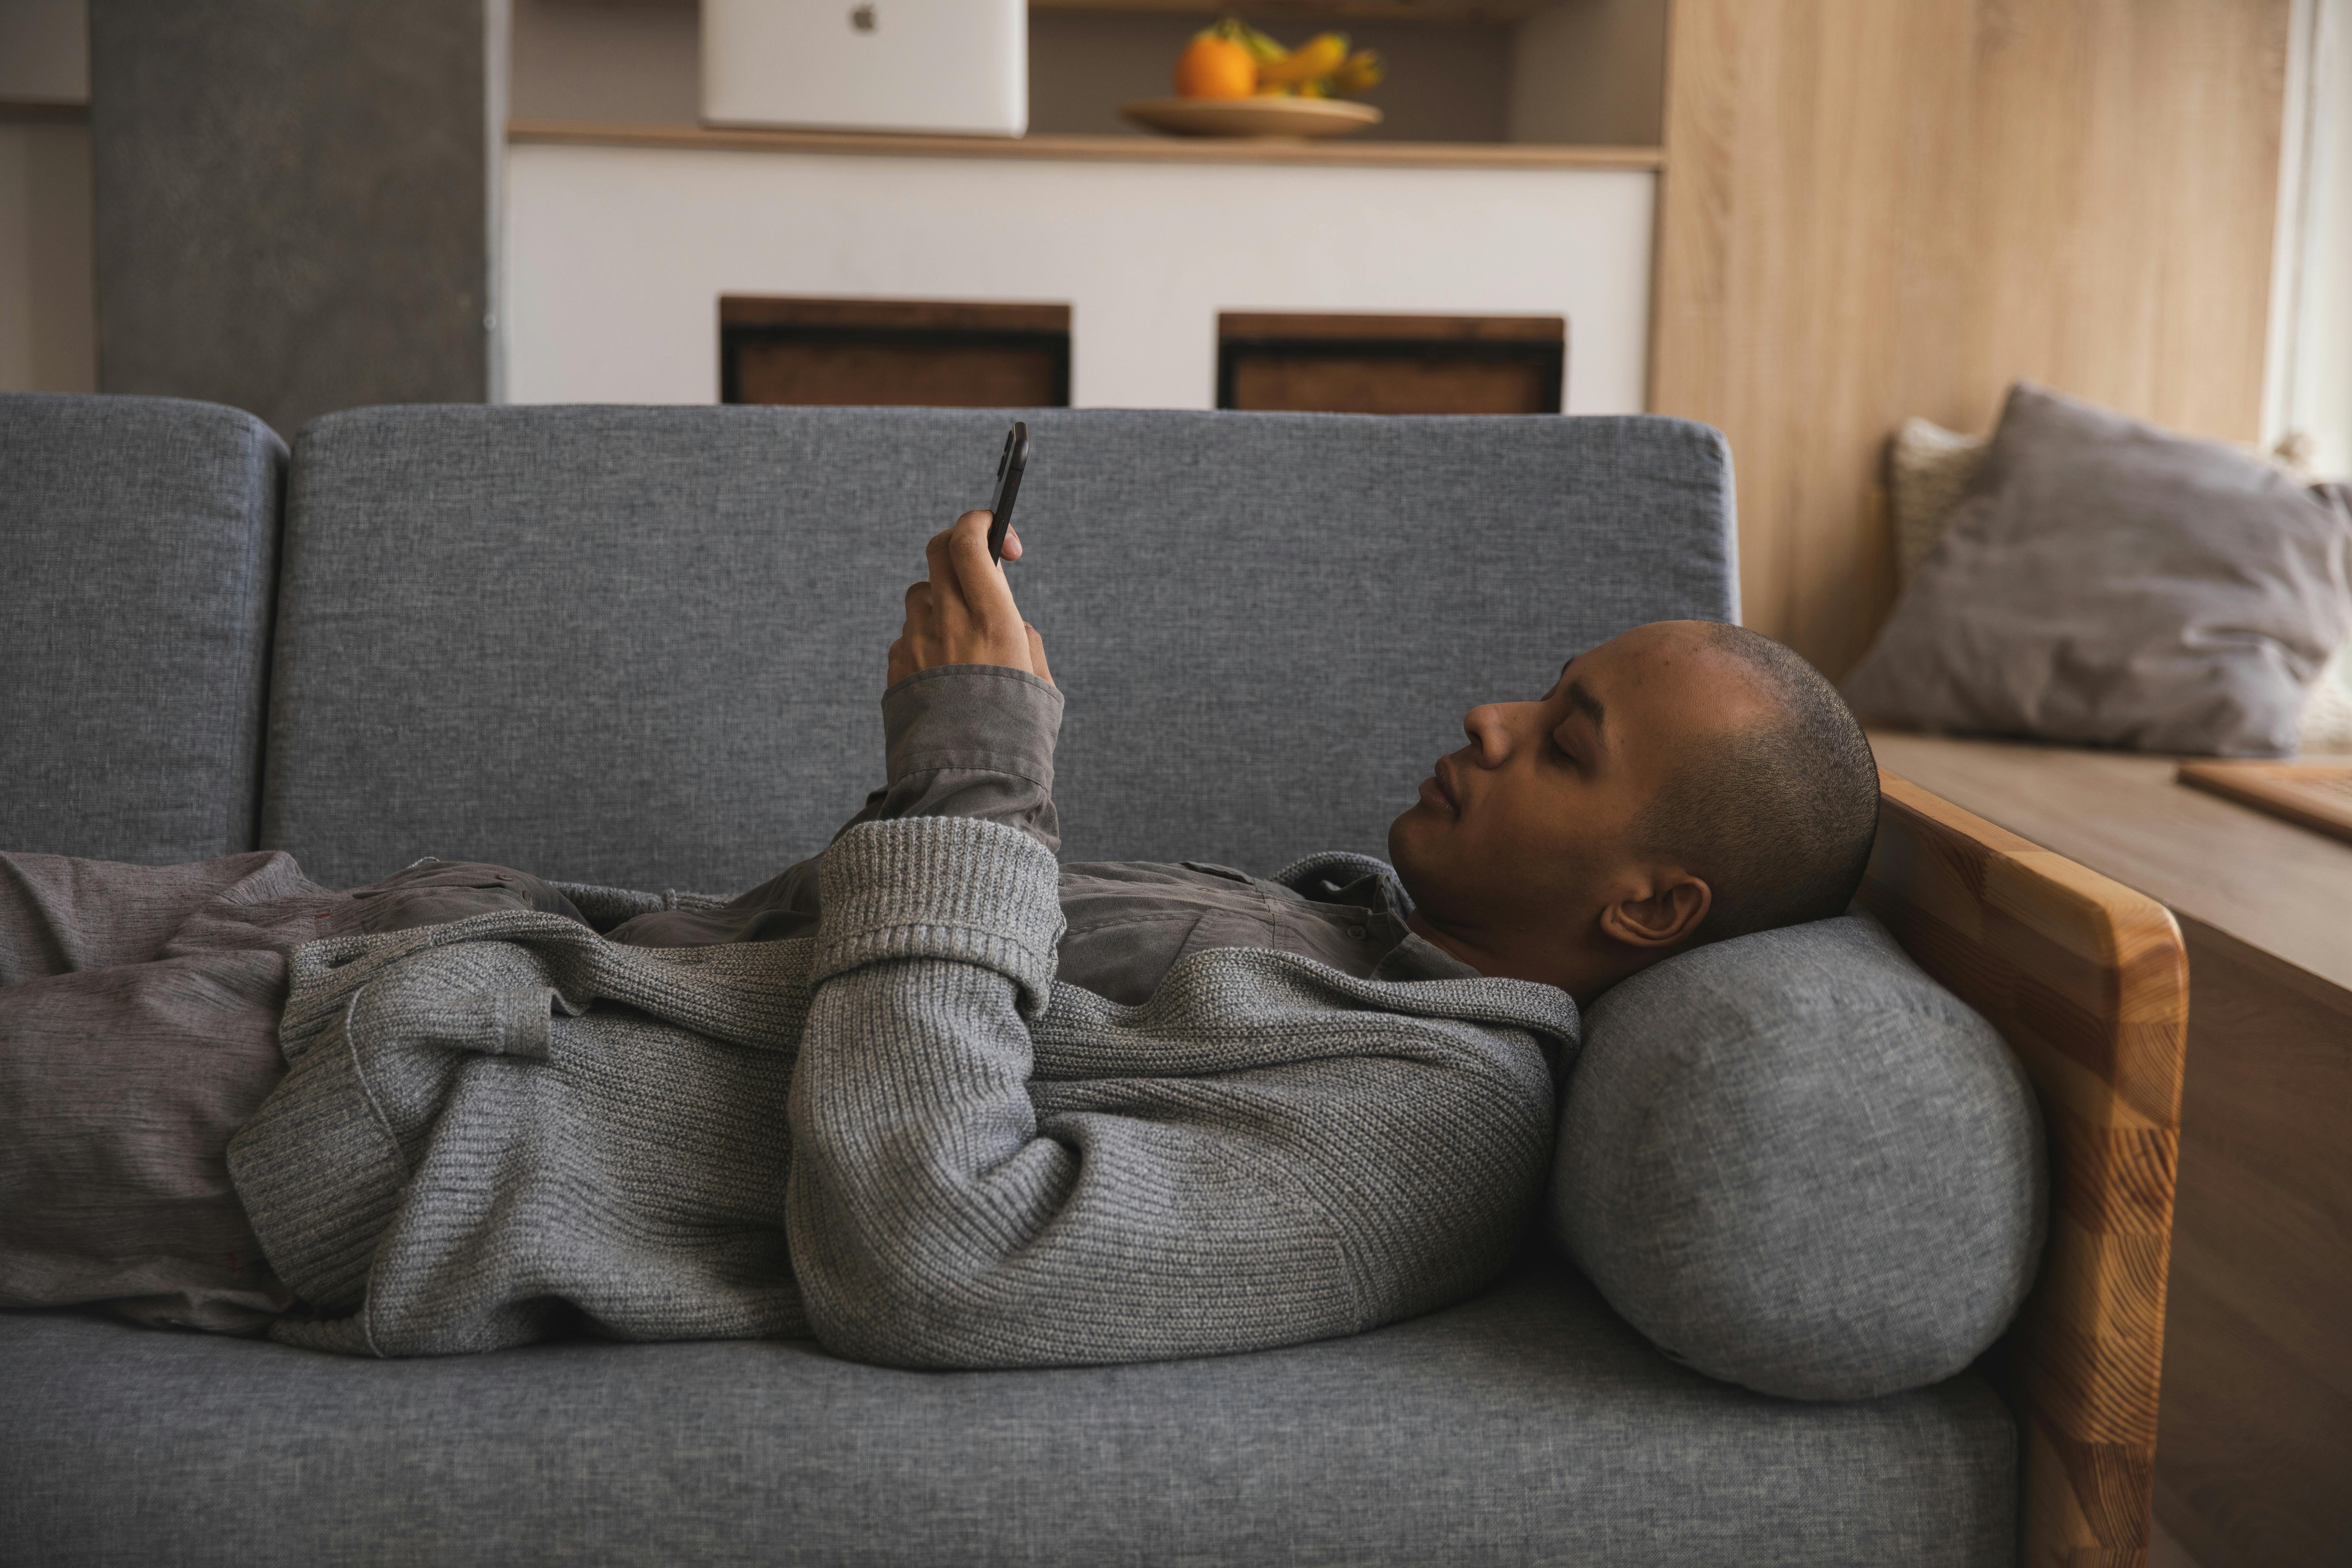 Man lying on a couch | Source: Pexels